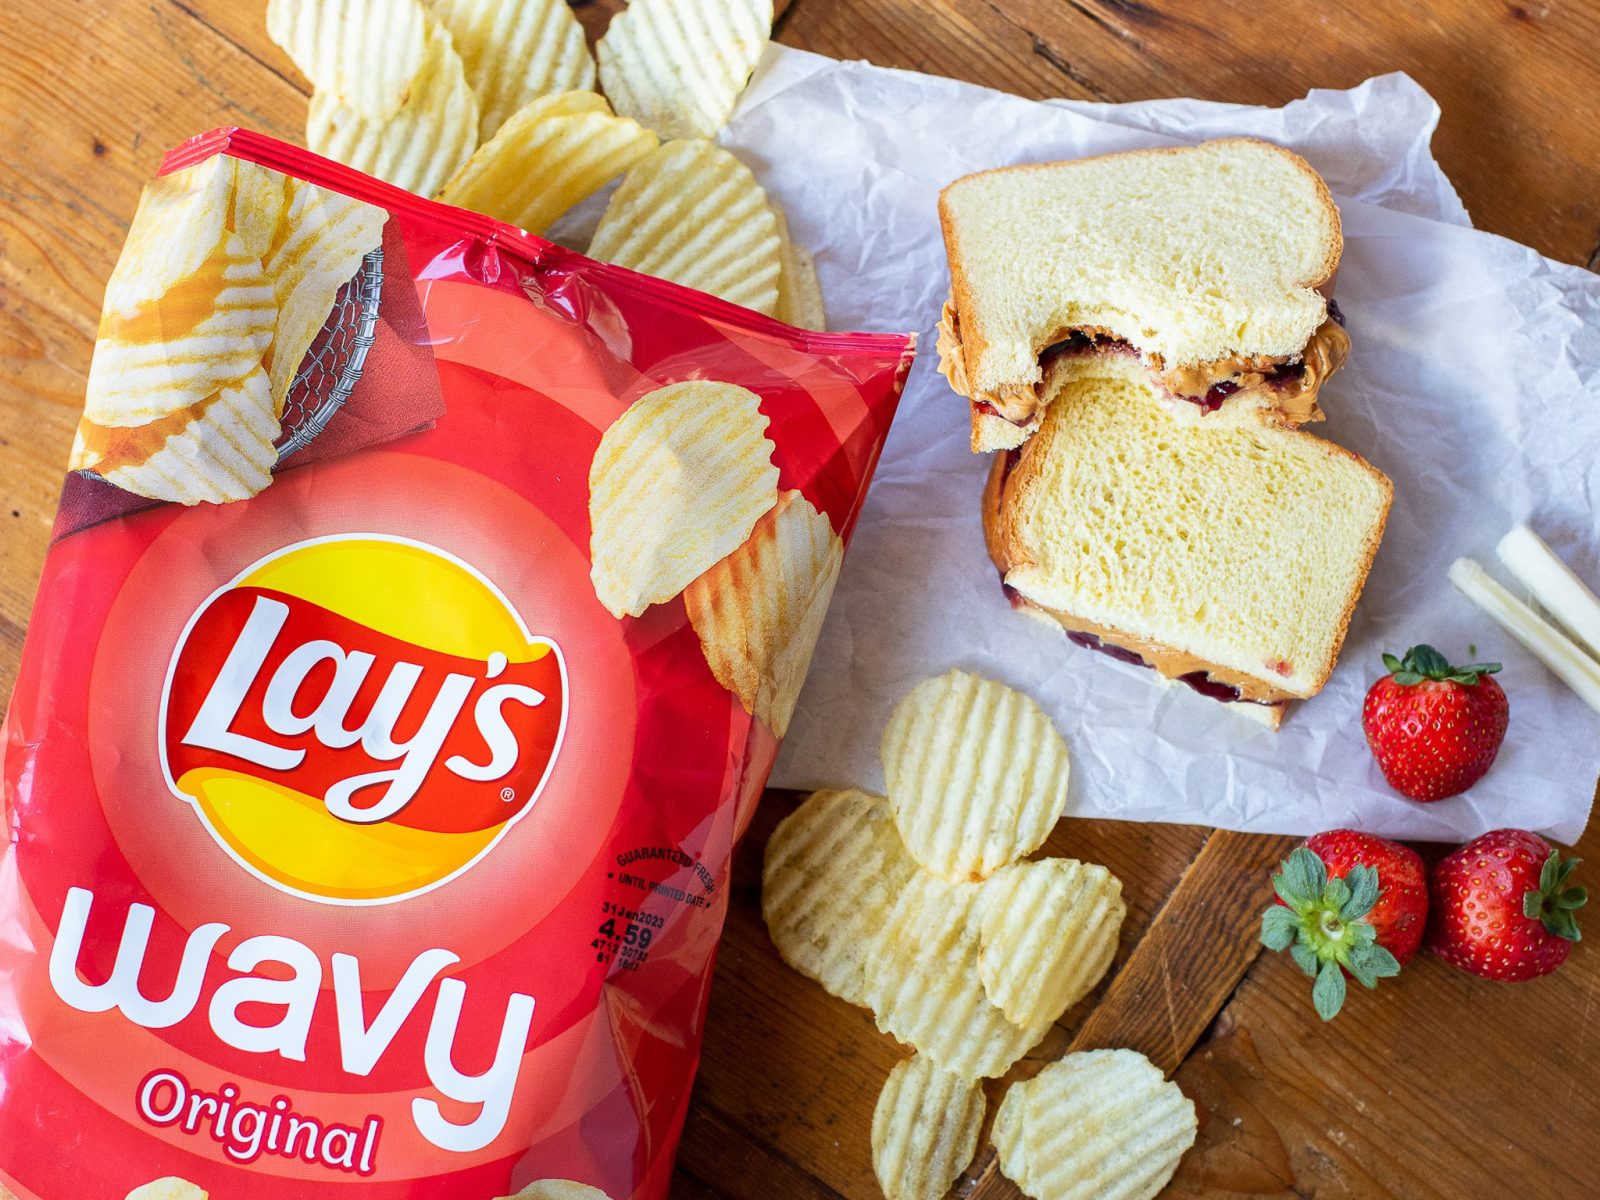 Lay’s Chips As Low As $1.99 At Kroger - iHeartKroger